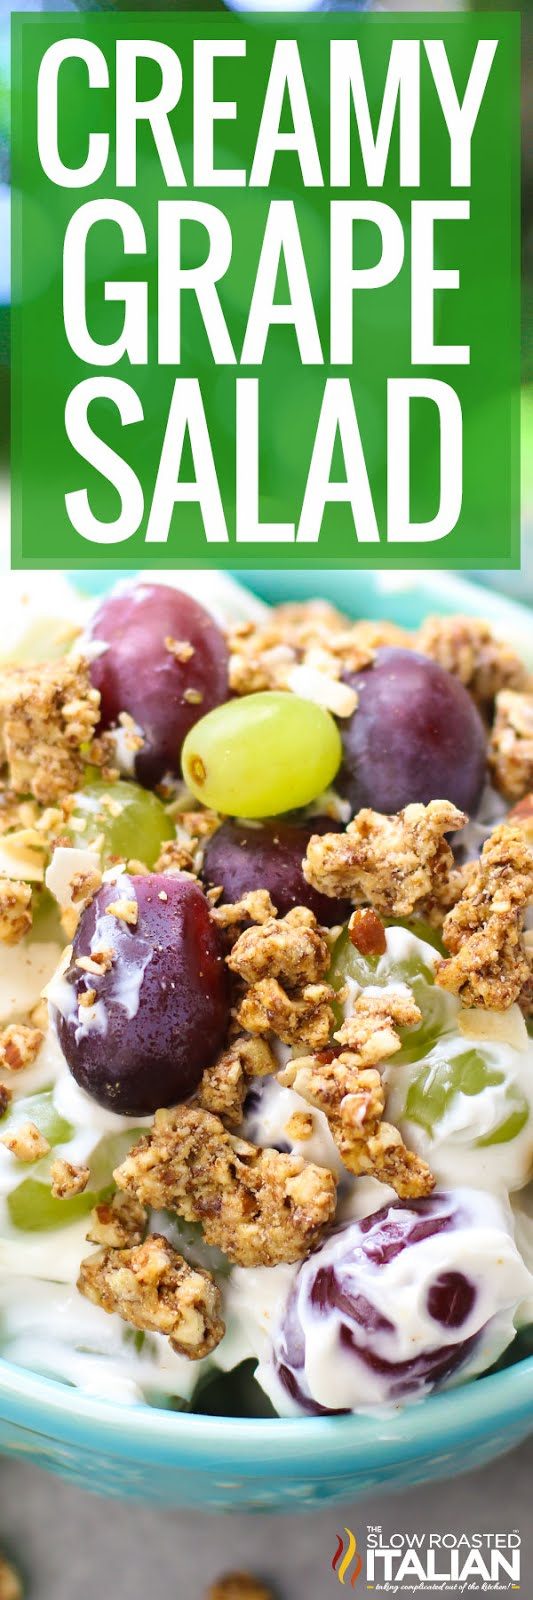 titled image (and shown): creamy grape salad